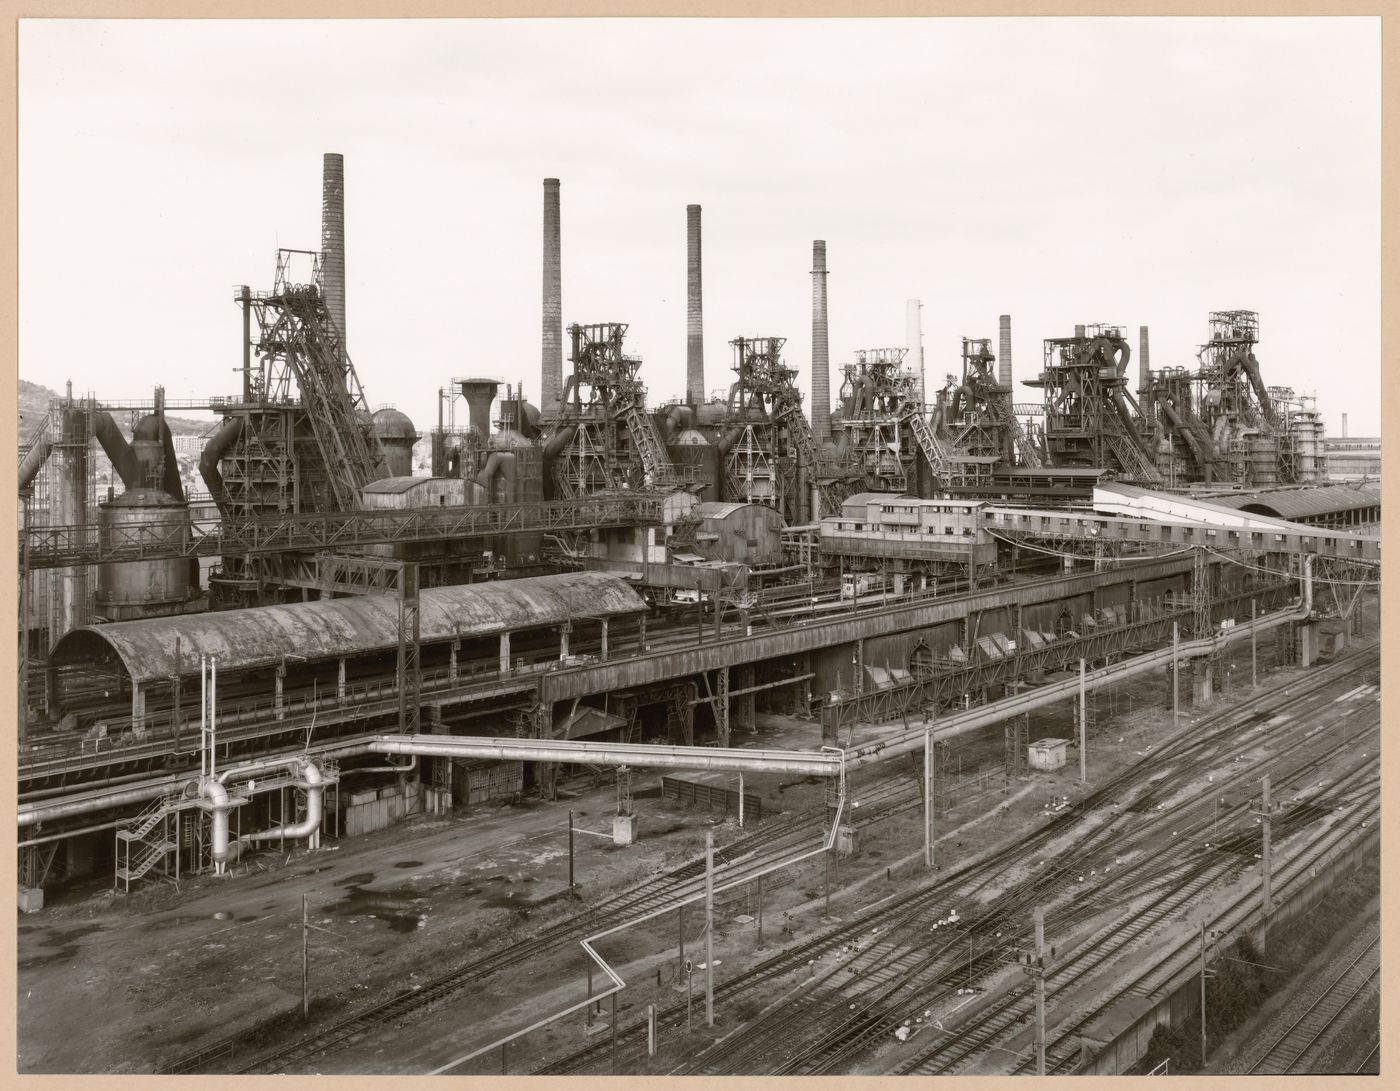 General view of Sacilor-Sollac steel mill, Rombas, Lorraine, France